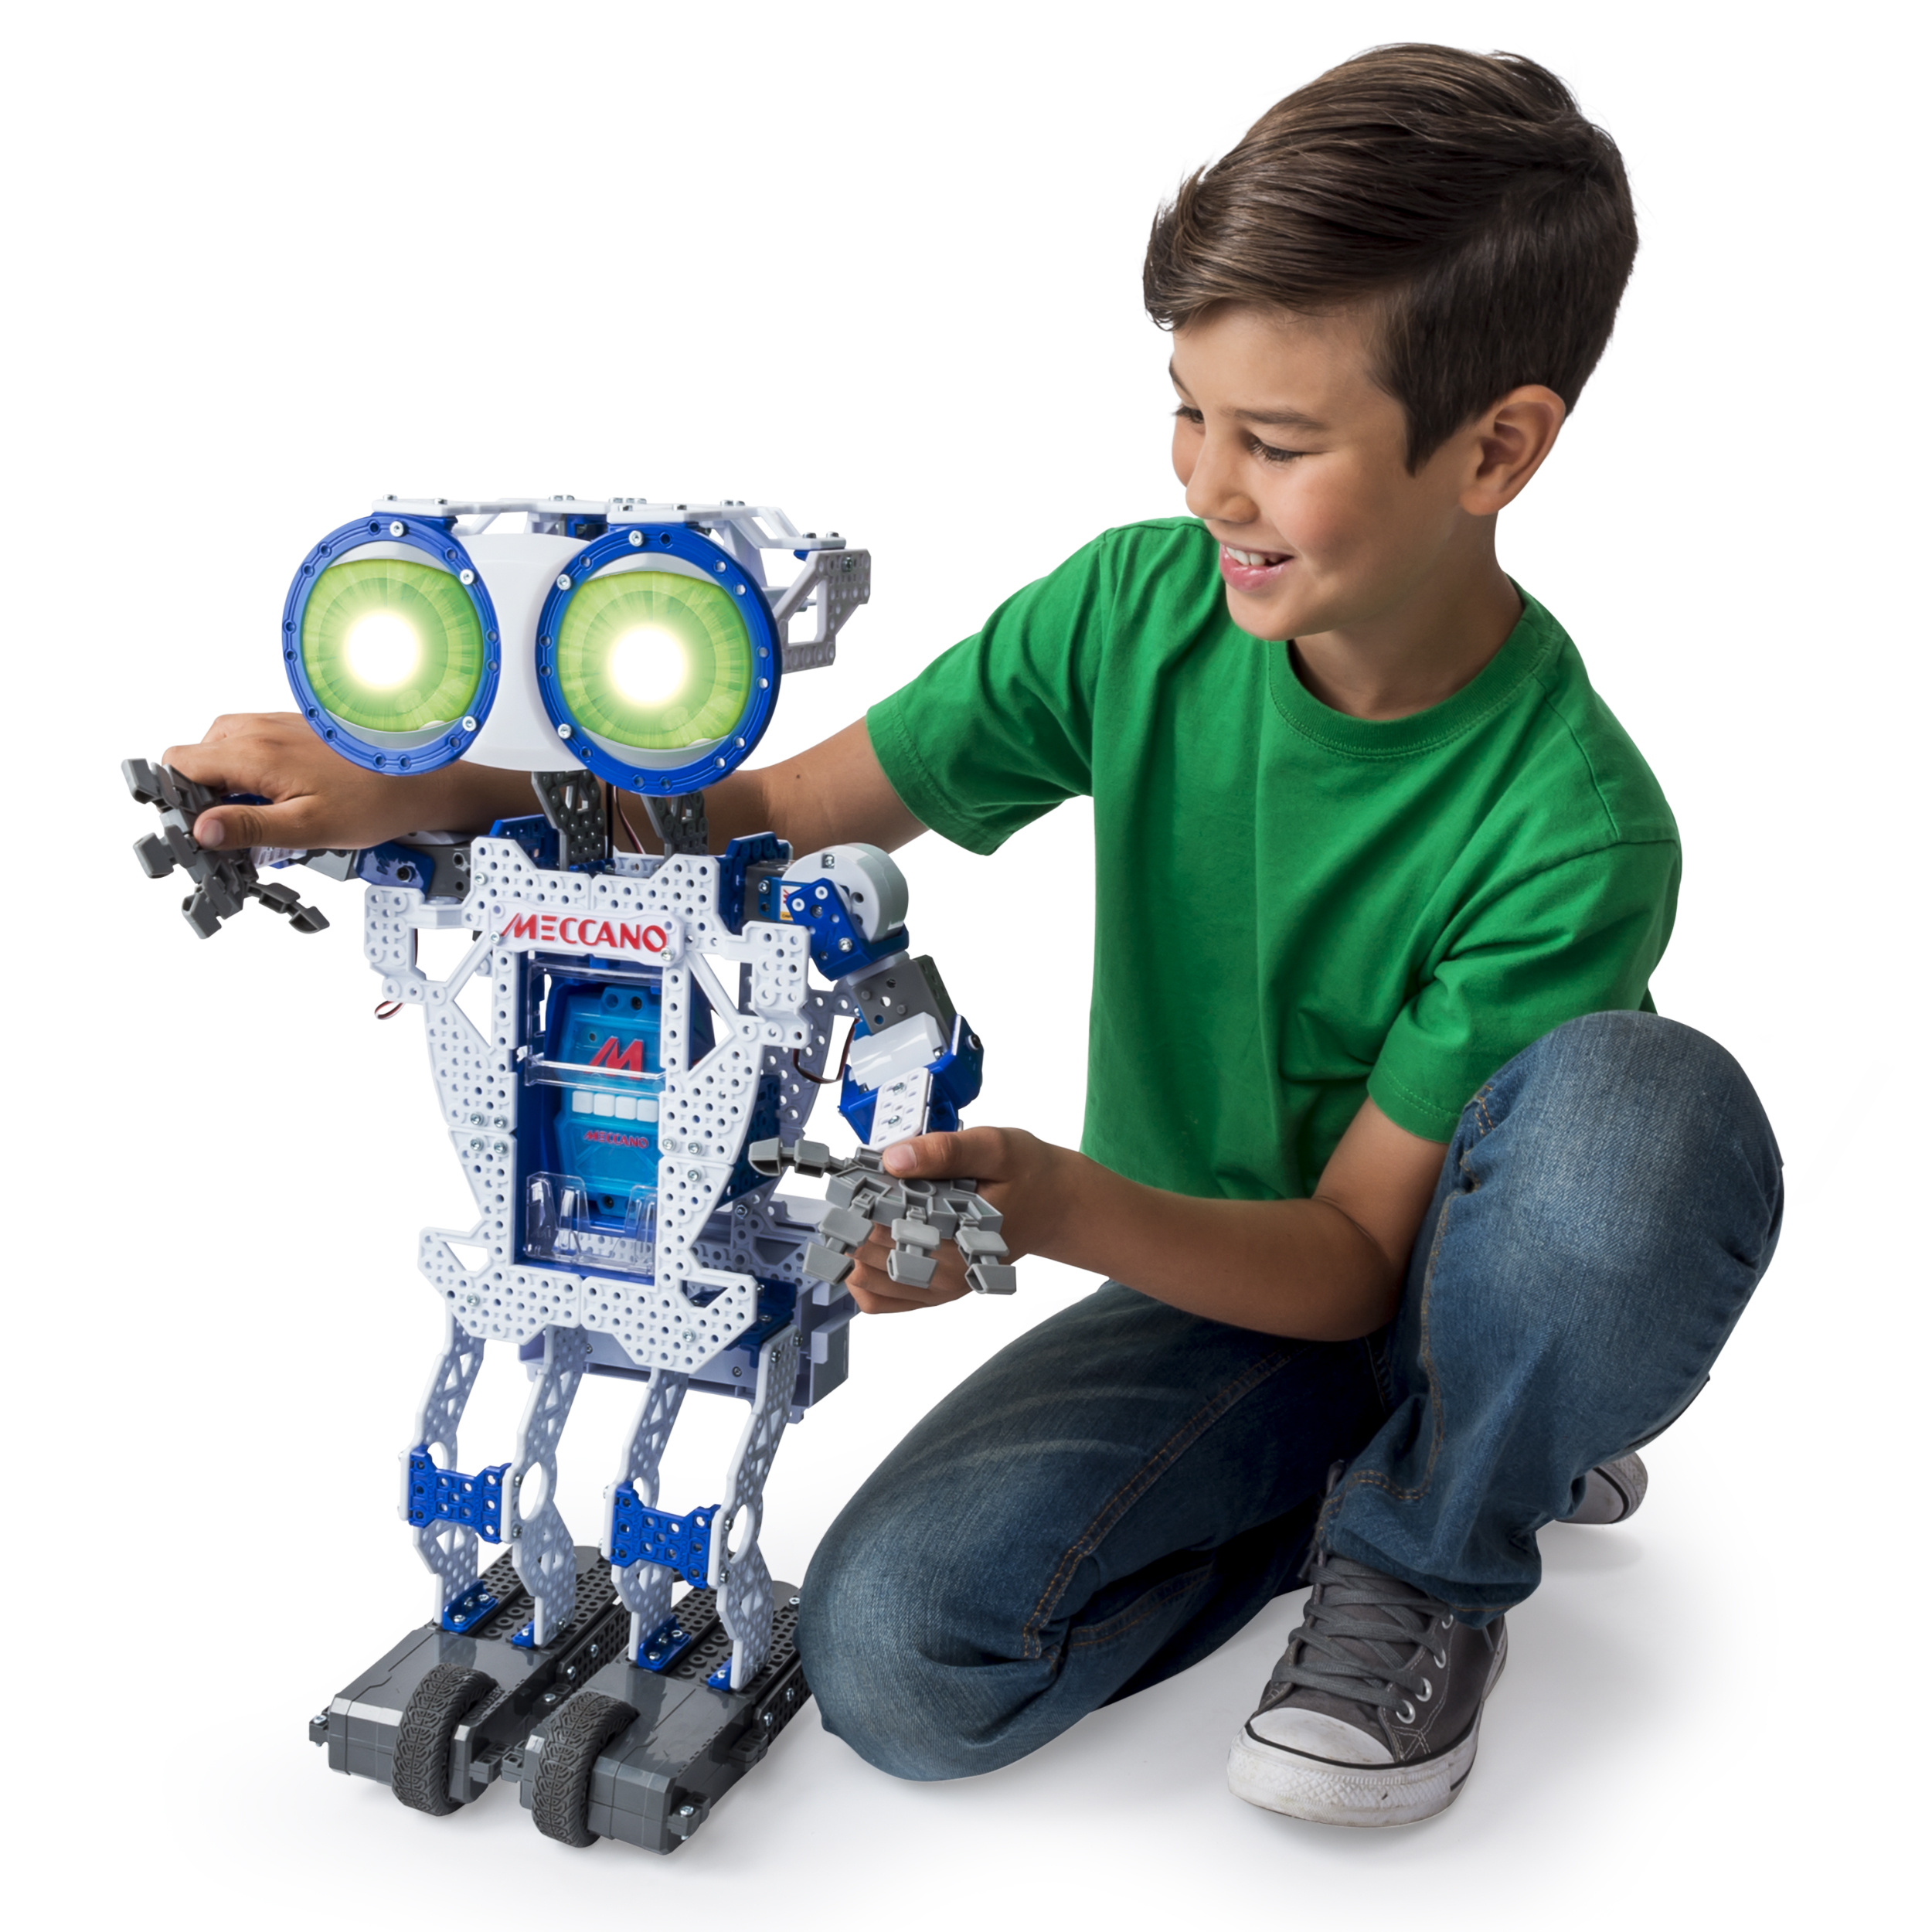 Meccano by Erector, Meccanoid 2.0 Robot-Building Kit STEM Engineering Education Toy - image 5 of 8